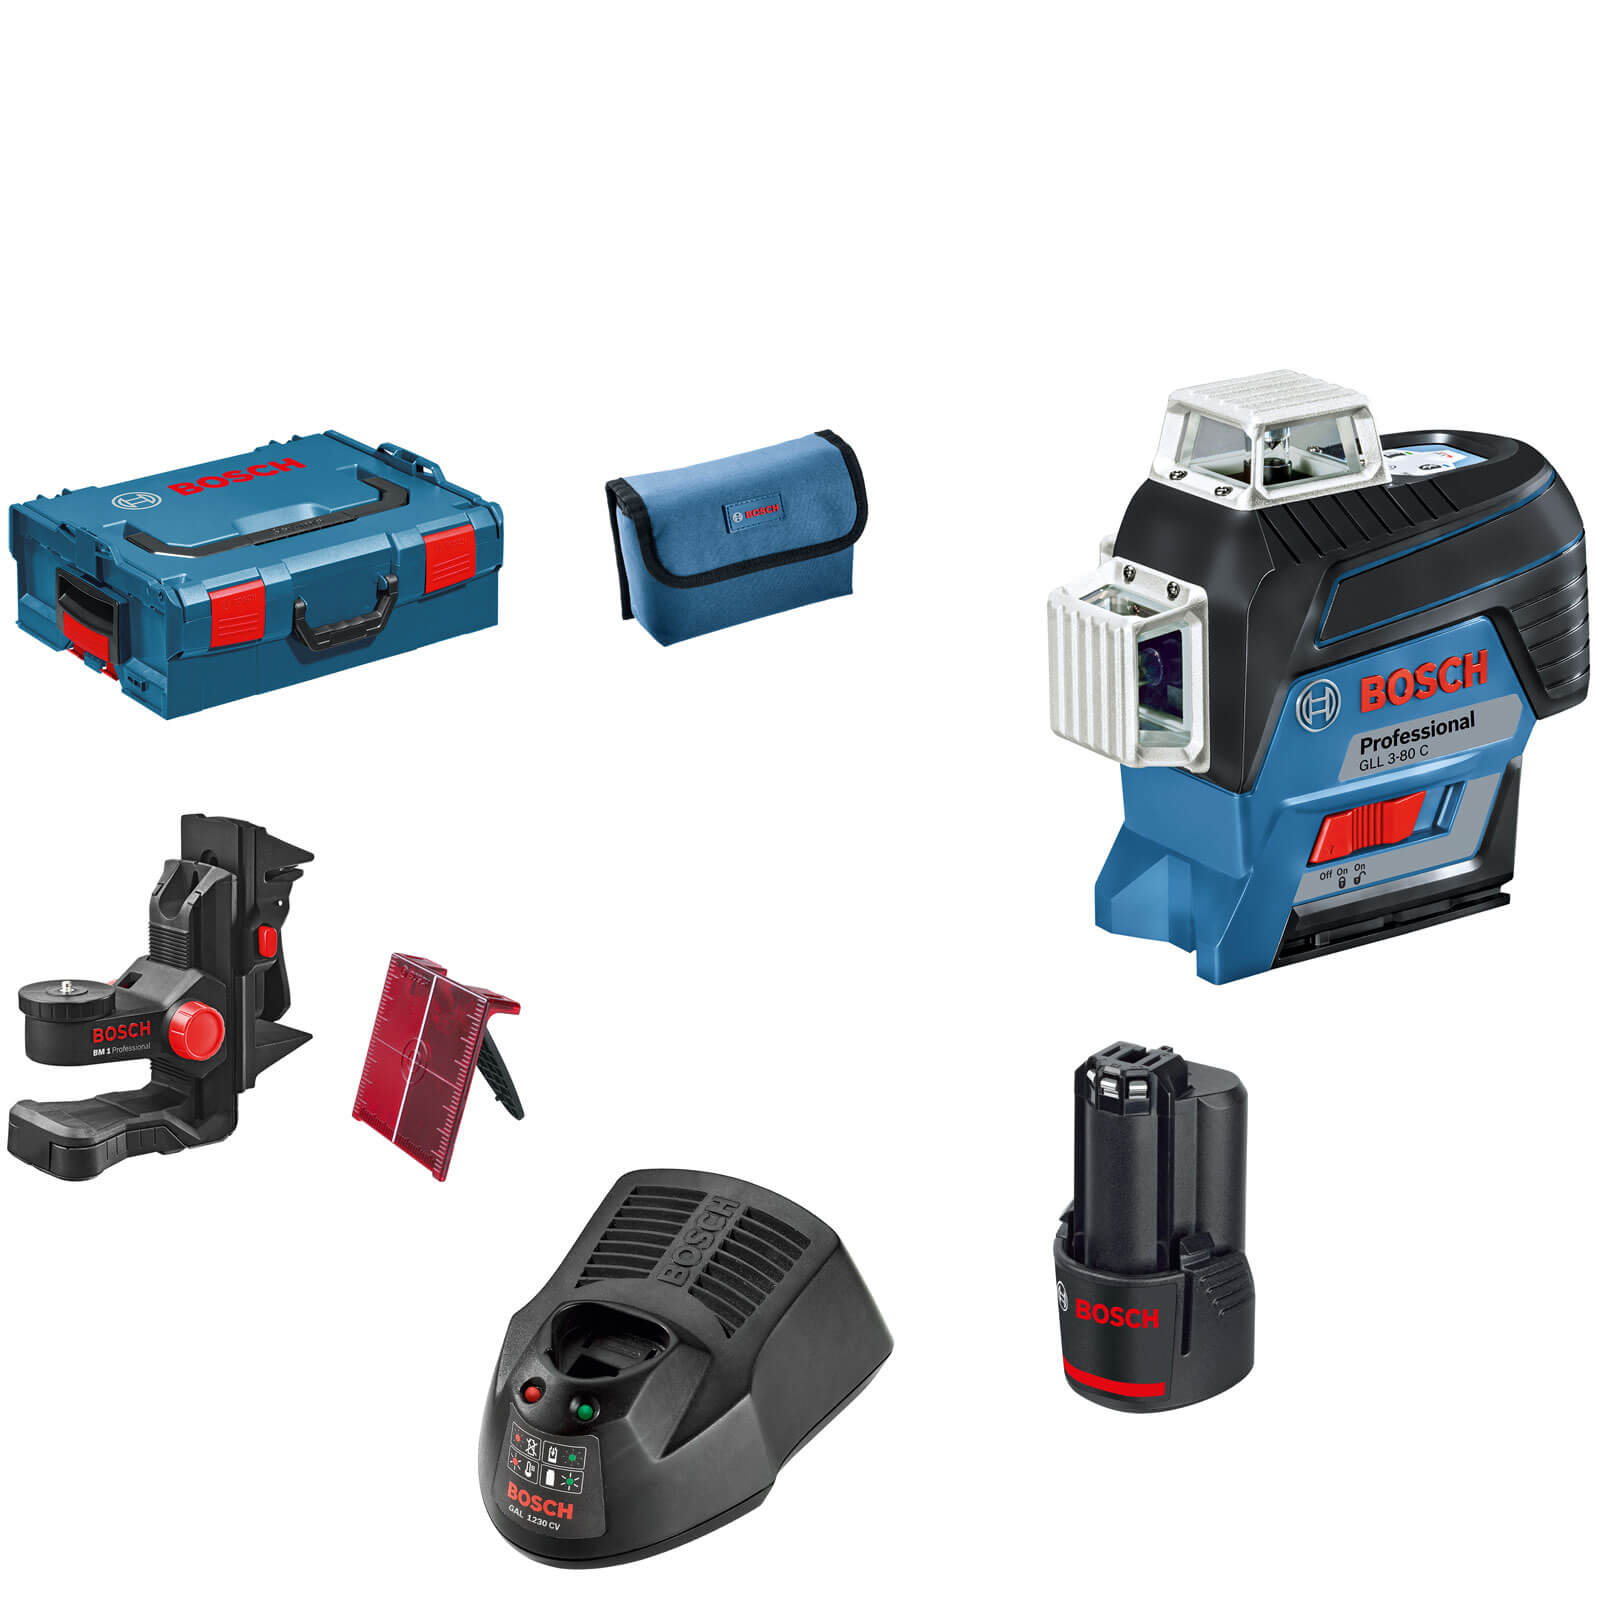 Image of Bosch GLL 3-80 C 12v Cordless Connected Line Laser Level 1 x 2ah Li-ion Charger Case